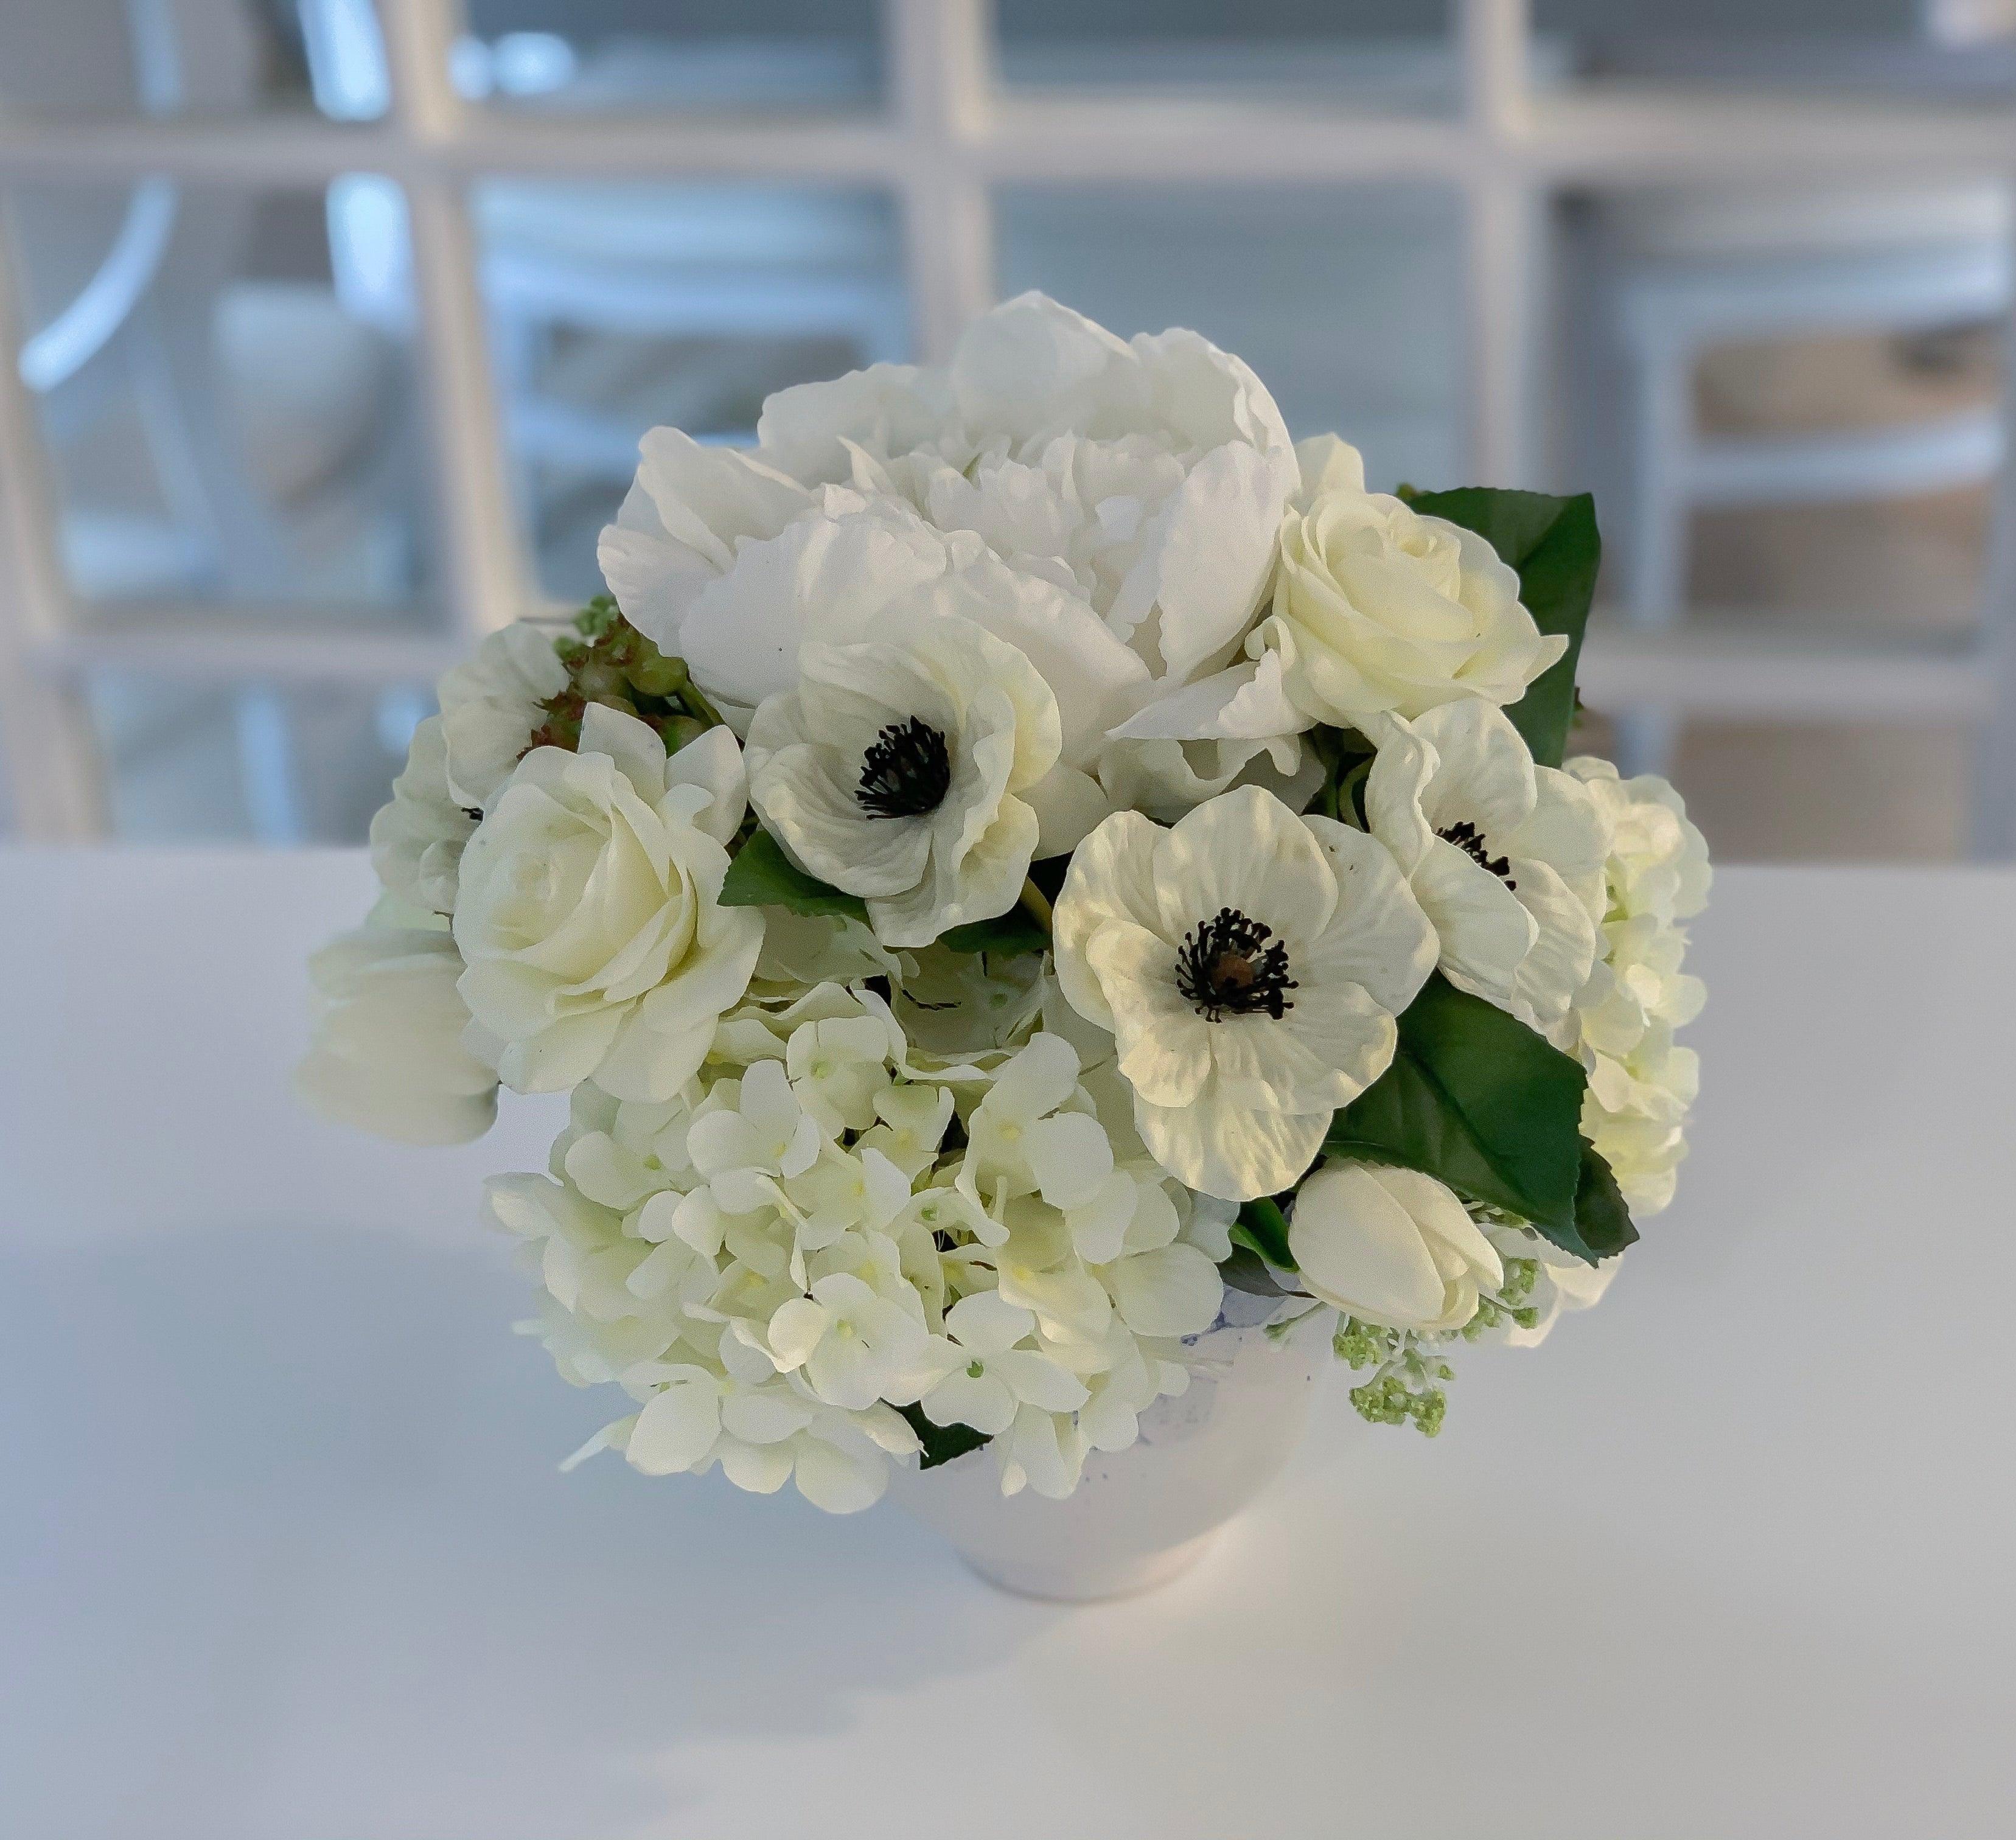 Mixed Real Touch White Flowers In Porcelain Vase - Flovery